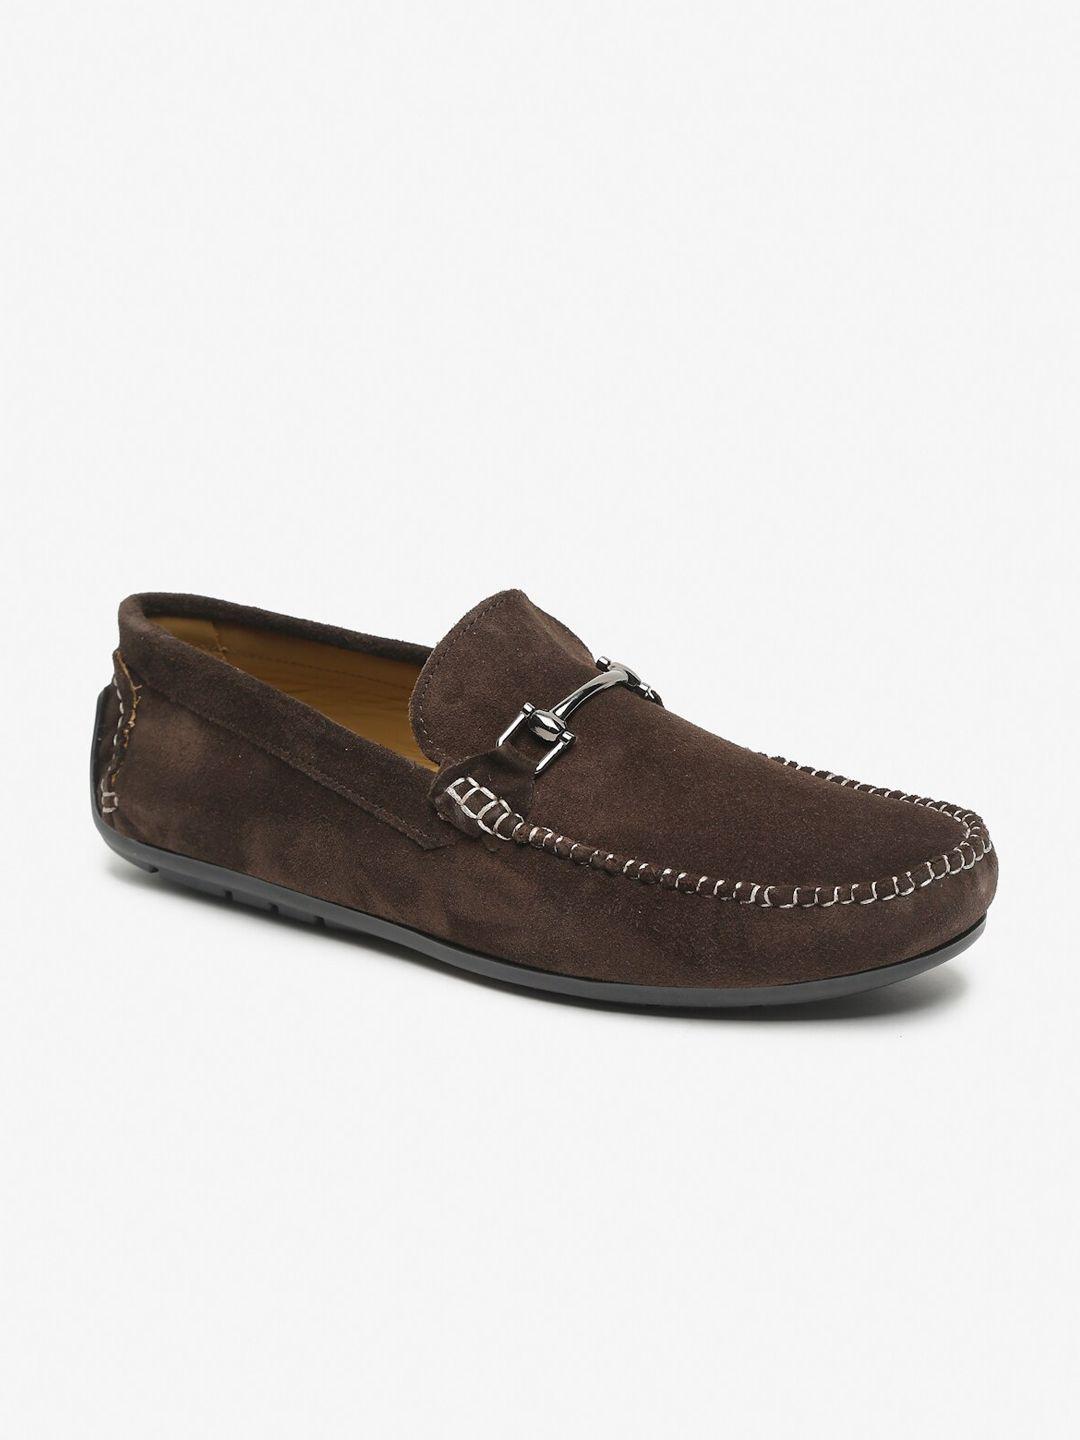 teakwood leathers men brown leather loafers